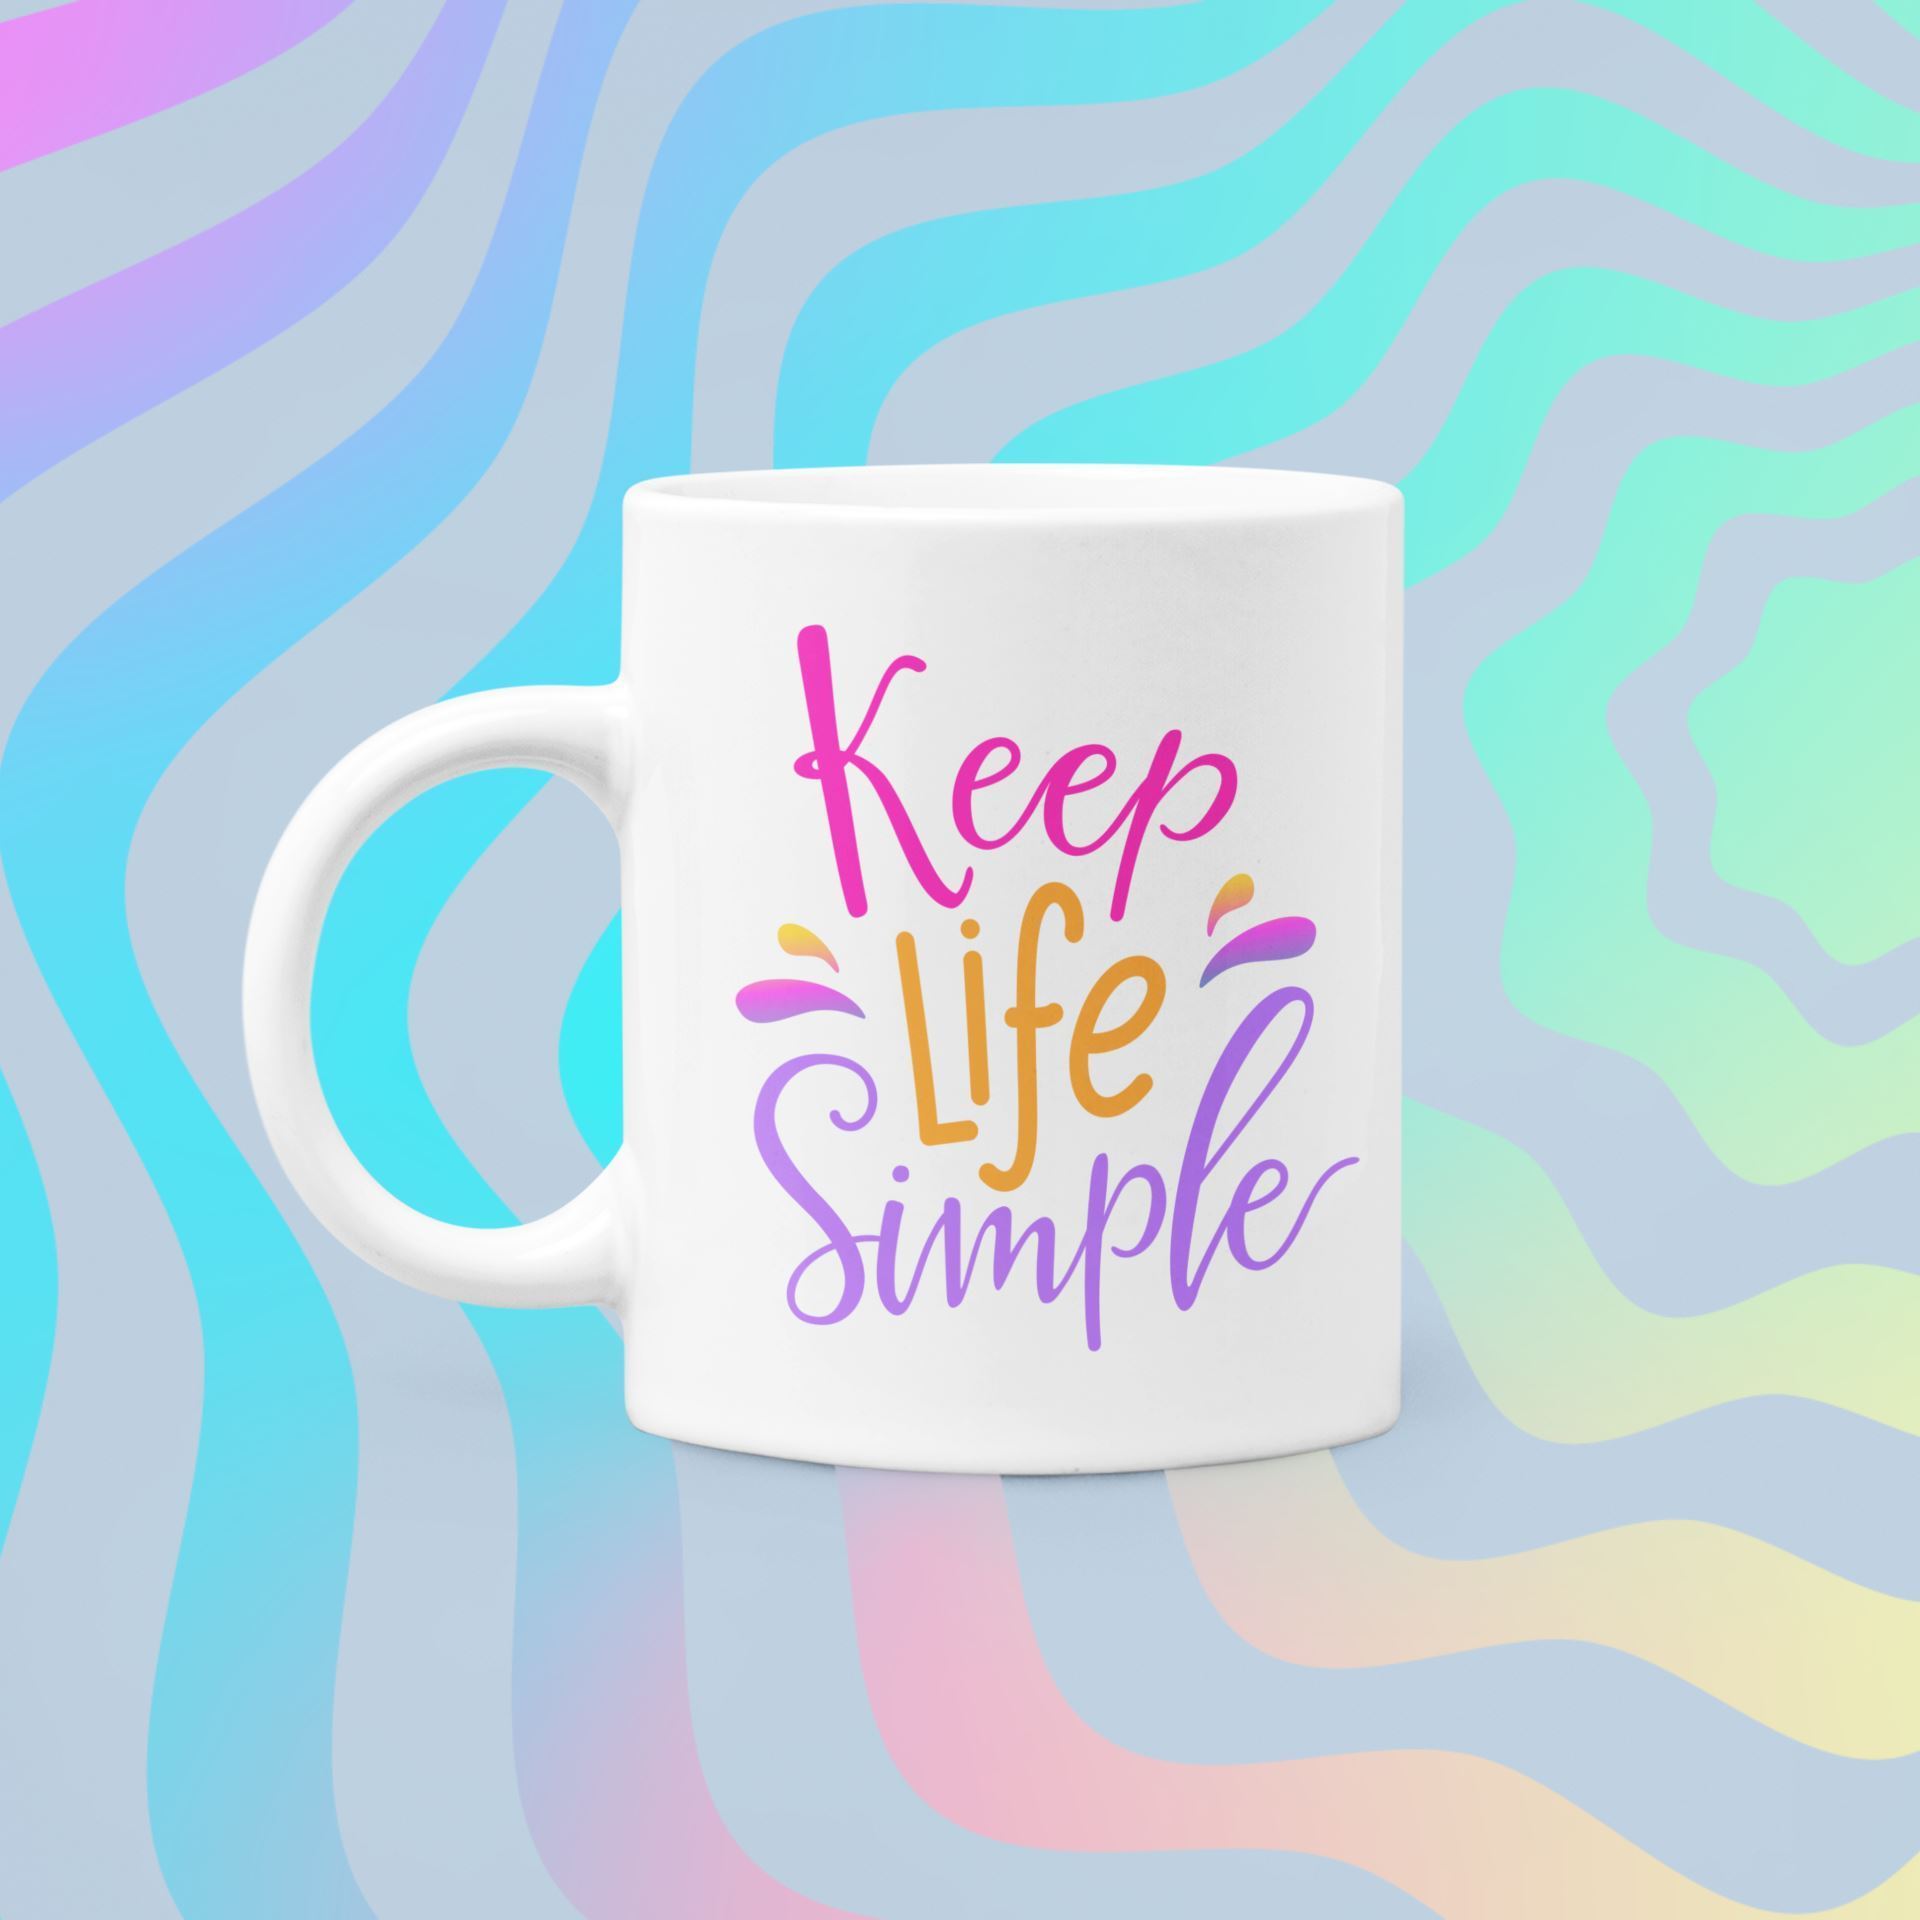 DIY Sublimation 11oz Coffee Mug With Heart Handle Ceramic 320ml White  Ceramics Cup Es Colorful Inner Coating Special Water Pottery FY4652 From  Wholesalefactory, $3.79